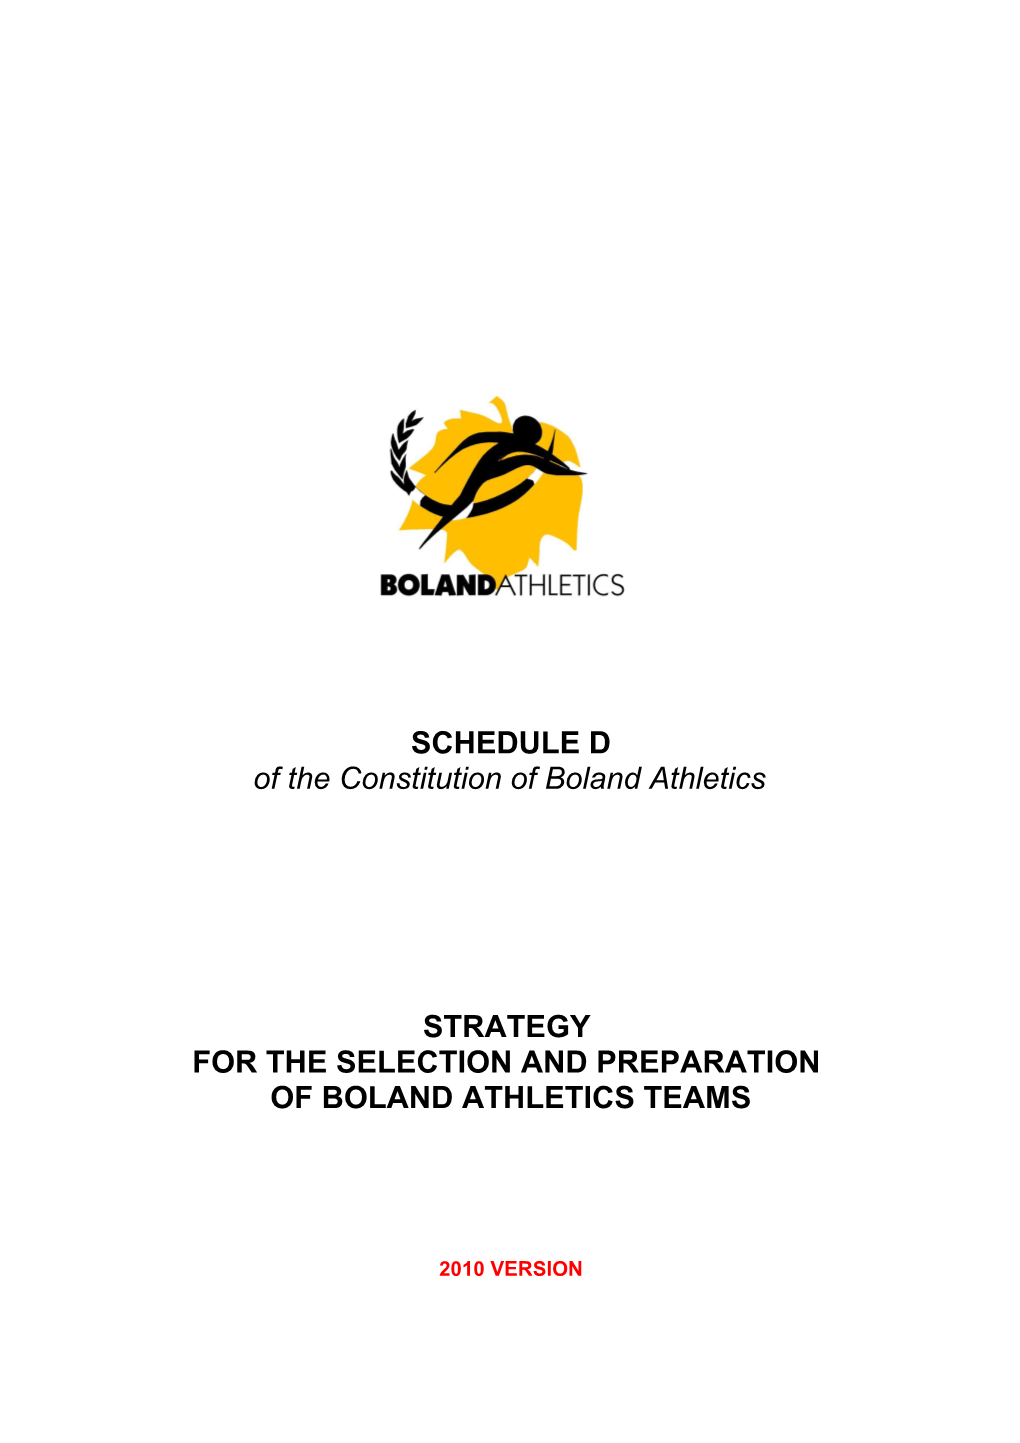 Of the Constitution of Boland Athletics